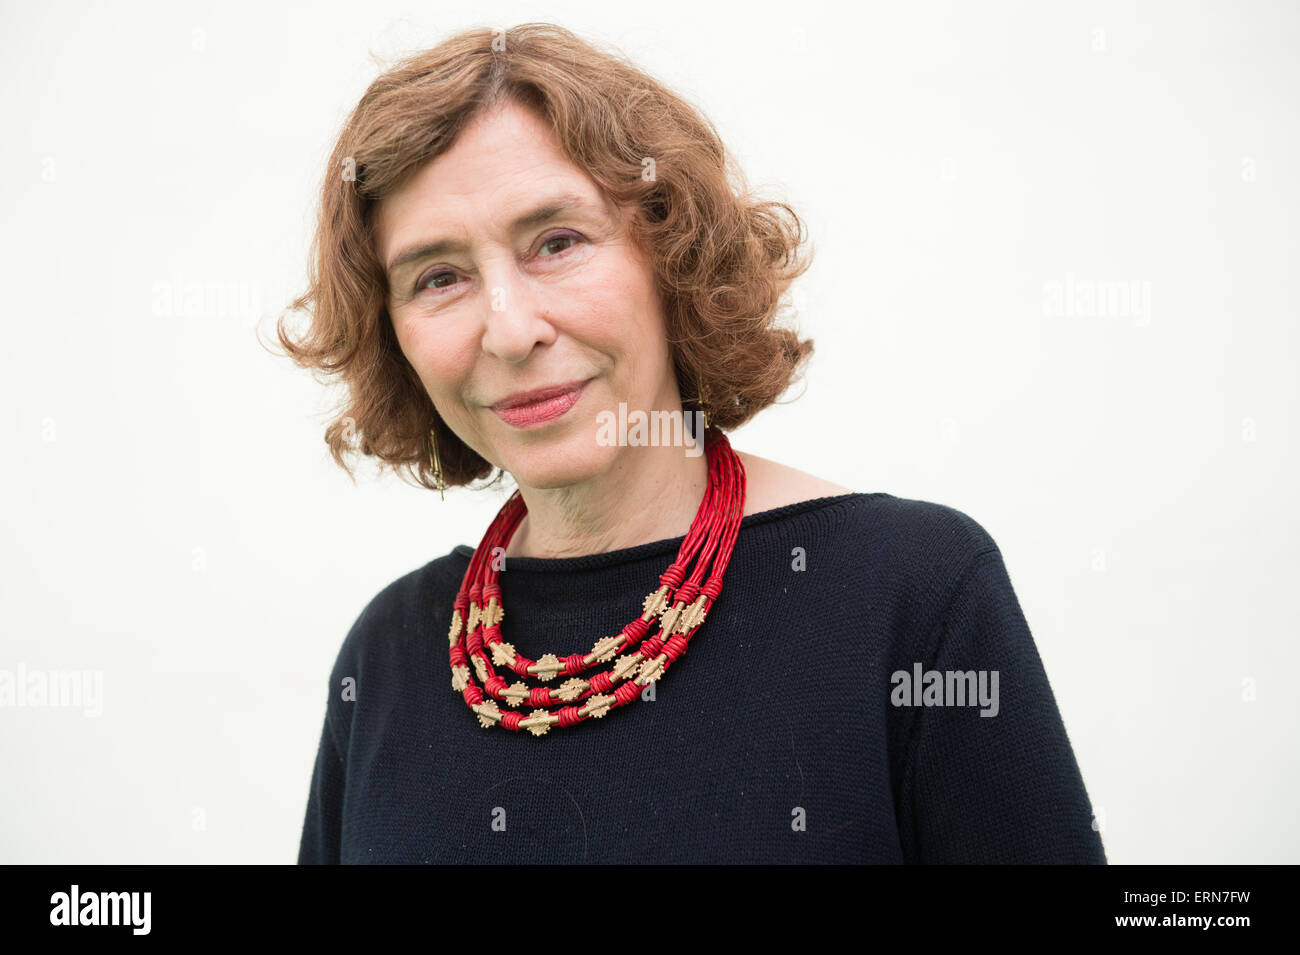 AZAR NAFISI, Hay Literature Festival 2015 Best known for her 2003 book Reading Lolita in Tehran: A Memoir in Books, which remained on the New York Times Bestseller list for 117 weeks, and has won several literary awards, including the 2004 Non-fiction Book of the Year Award from Booksense Stock Photo